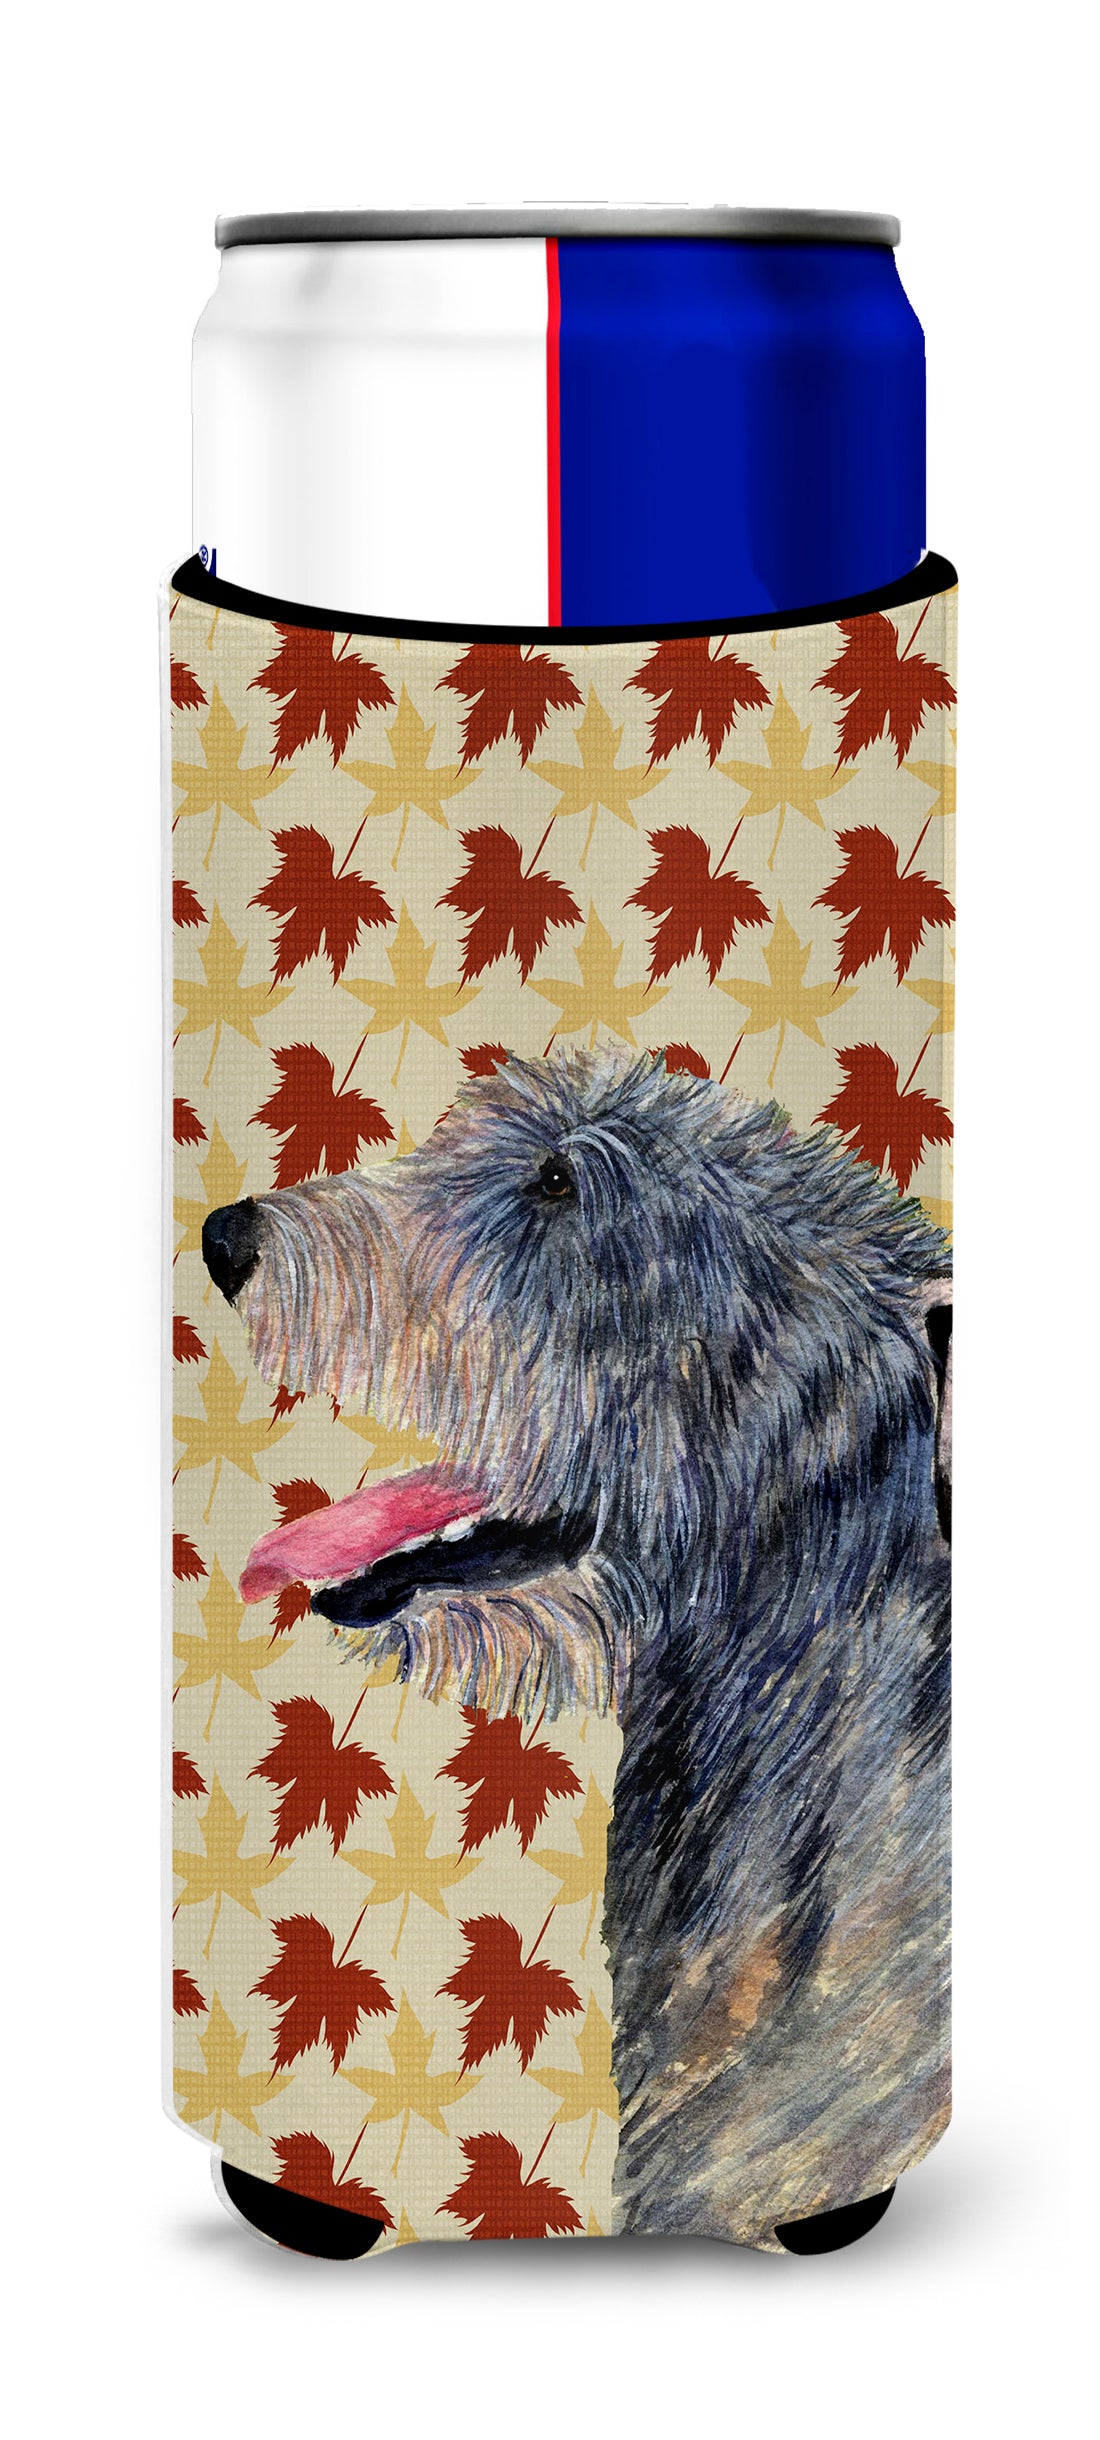 Irish Wolfhound Fall Leaves Portrait Ultra Beverage Insulators for slim cans SS4350MUK